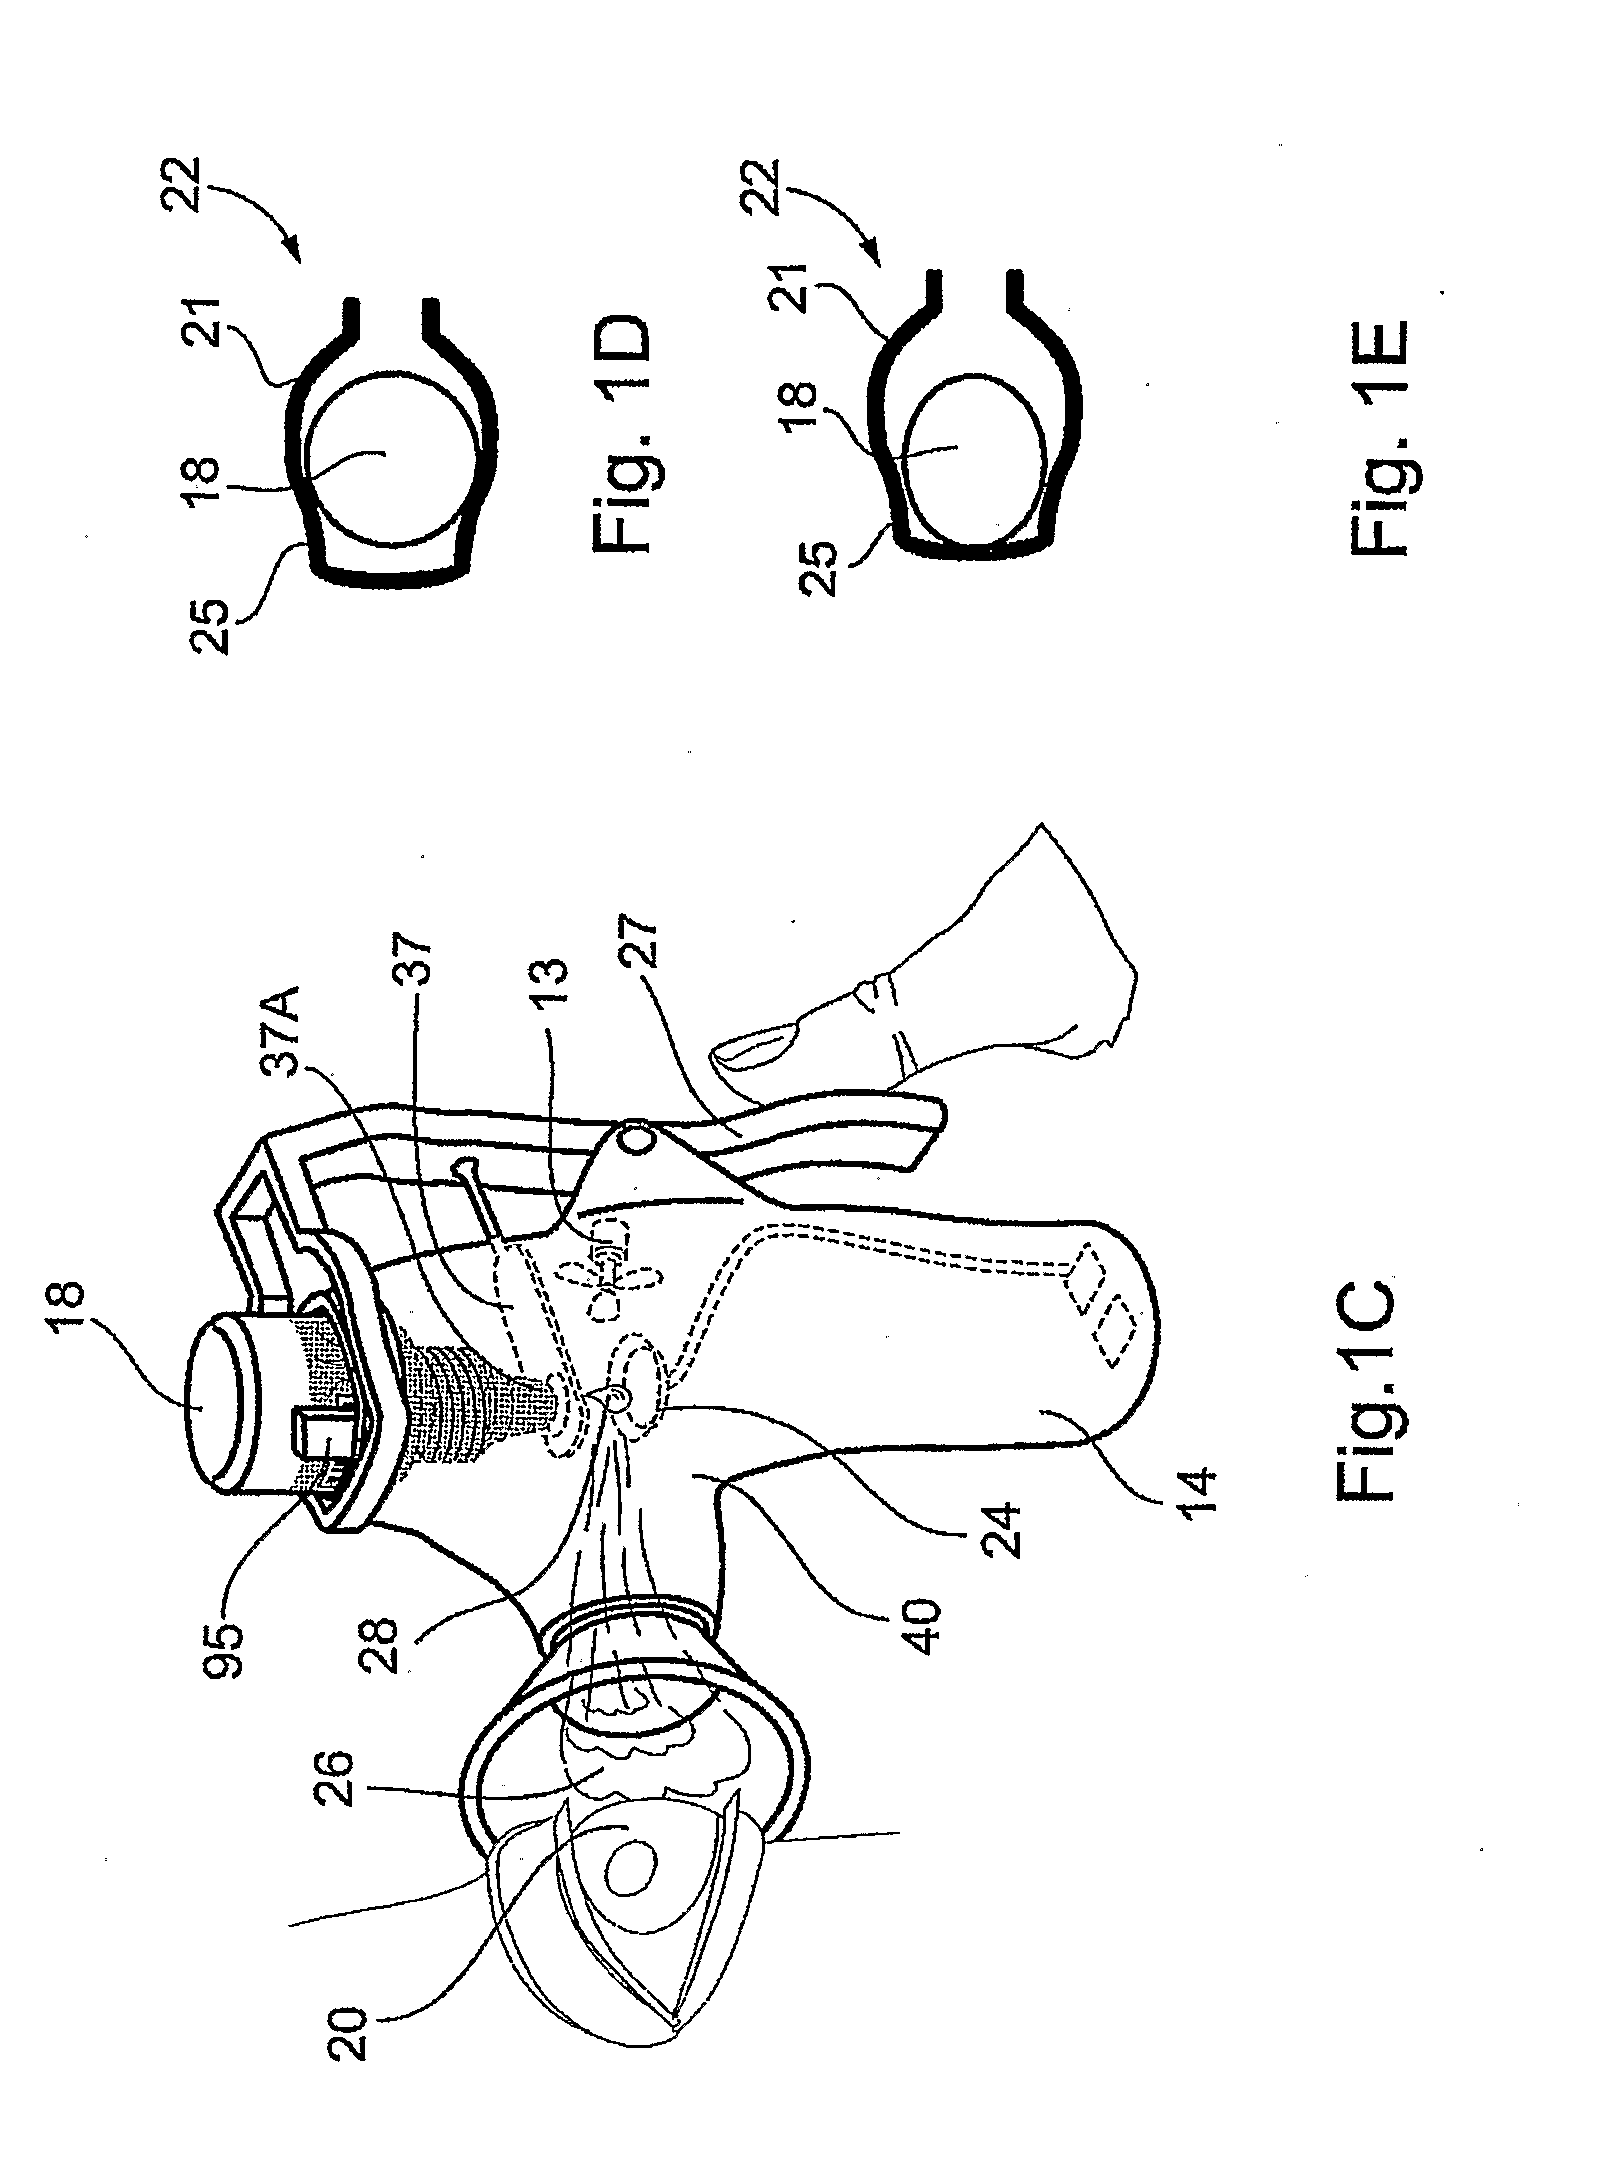 Method and Device for Ophthalmic Administration of Active Pharmaceutical Ingredients